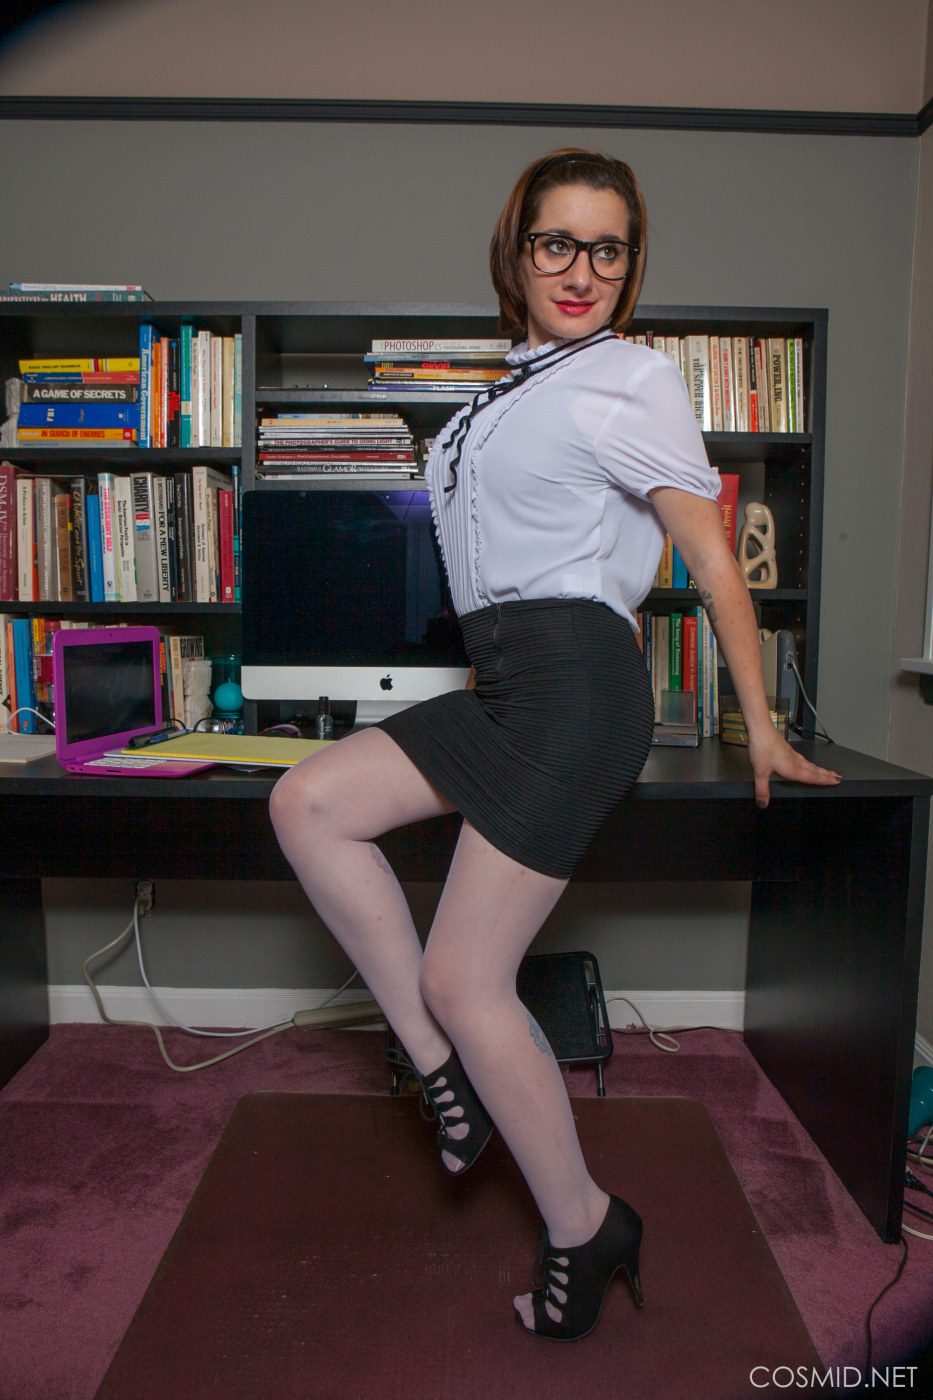 Chelsea Bell - a secretary - 21-0021 from Cosmid